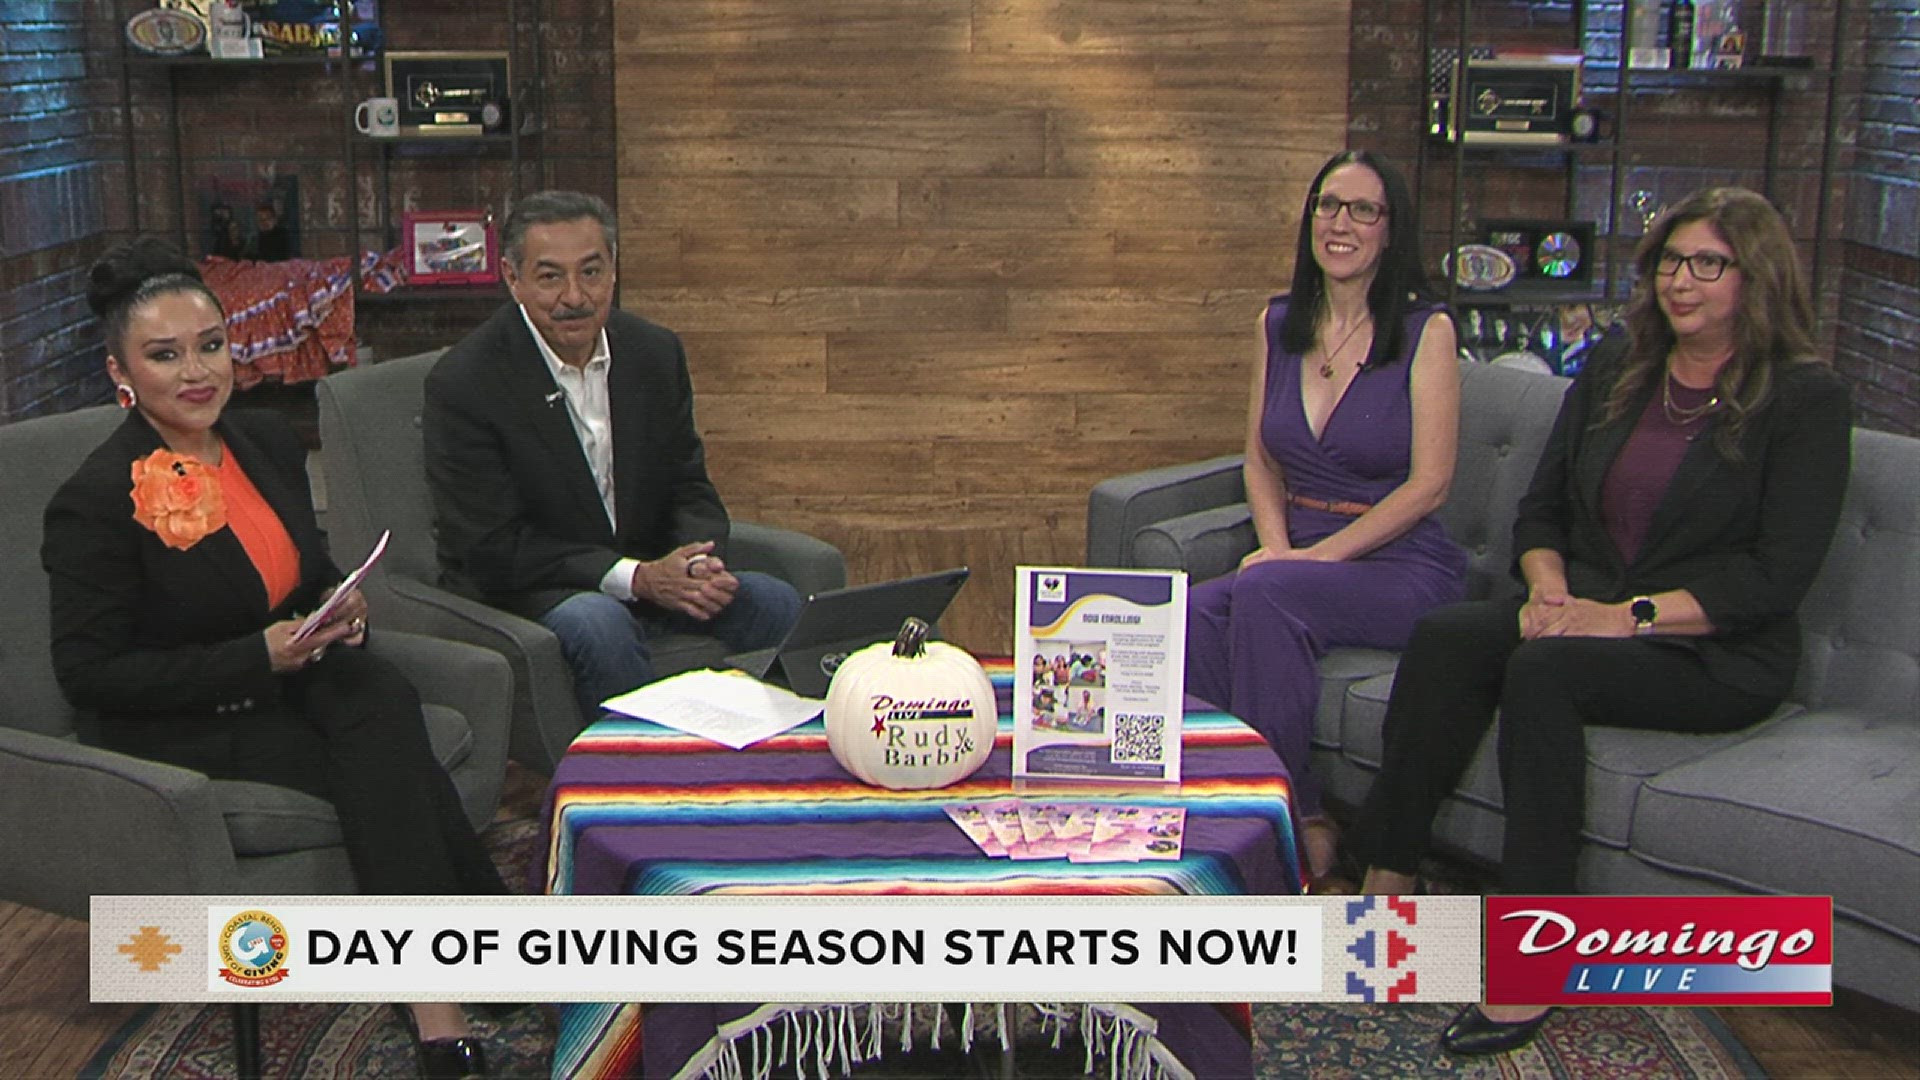 Coastal Bend Community Foundation and Choice Living Community reps joined us on Domingo Live to discuss the 15th Annual Day of Giving and who will benefit this year.